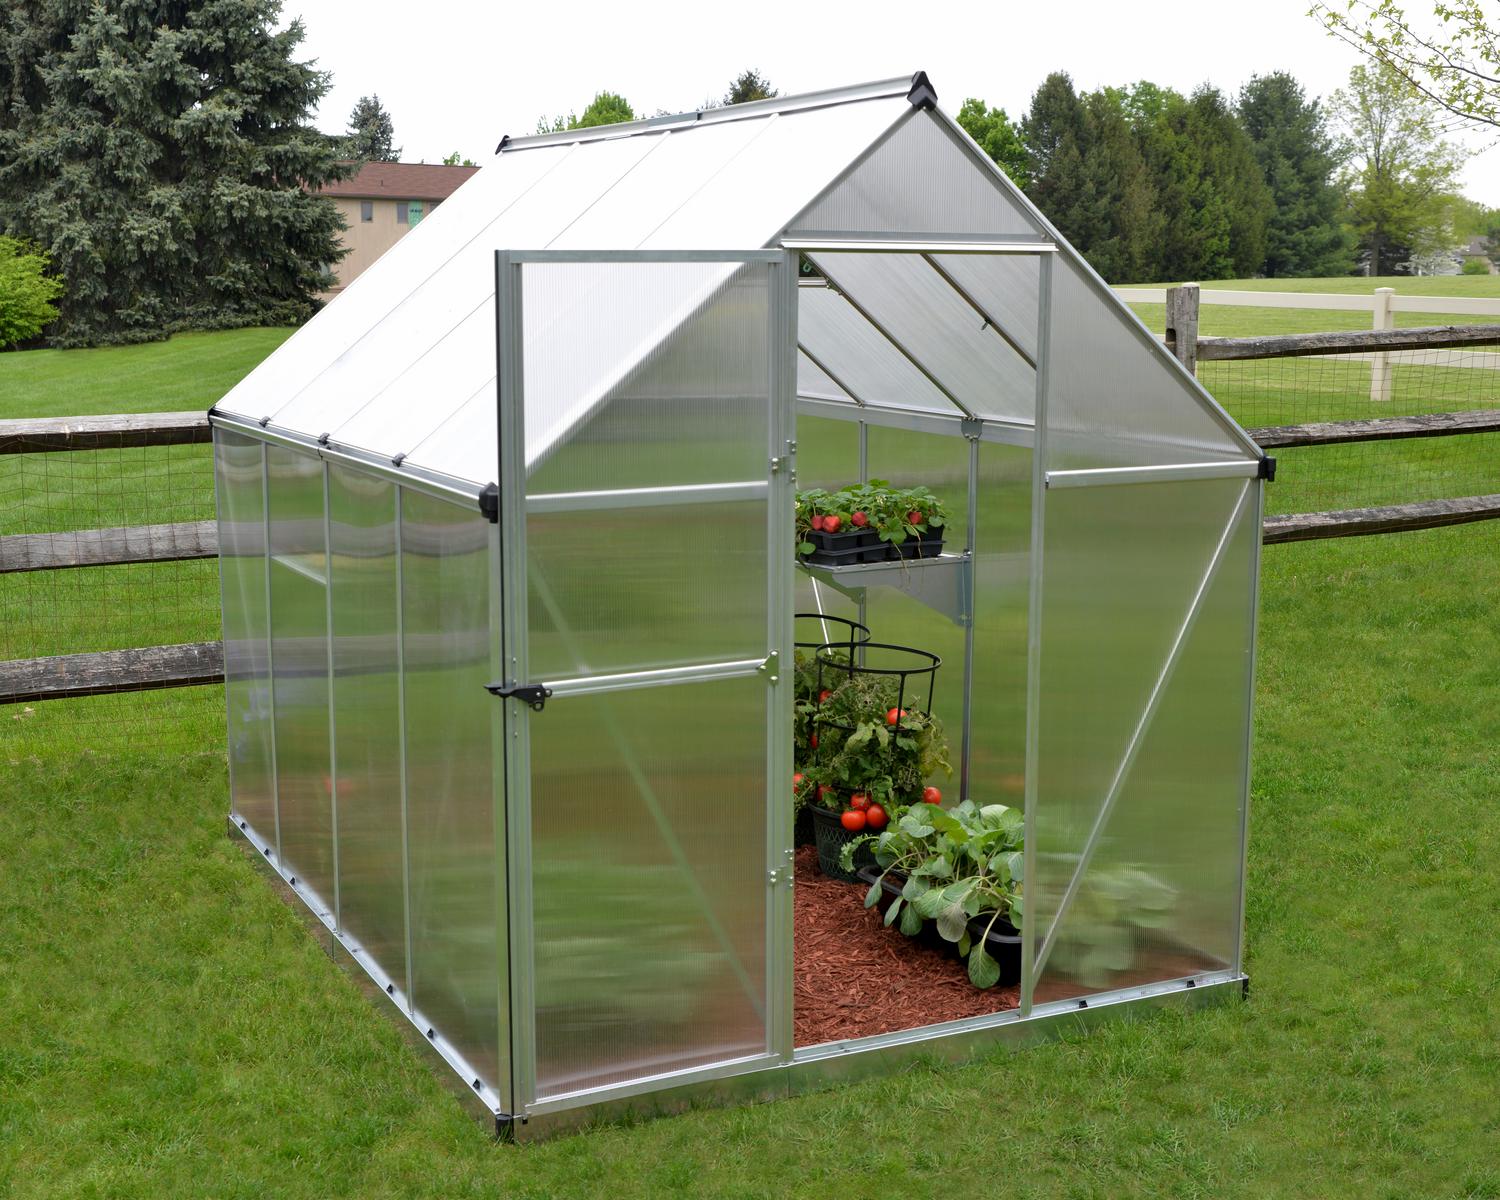 Mythos 6 ft. x 8 ft. Greenhouse Silver Structure &amp; Twinwall Panels outside on a lawn